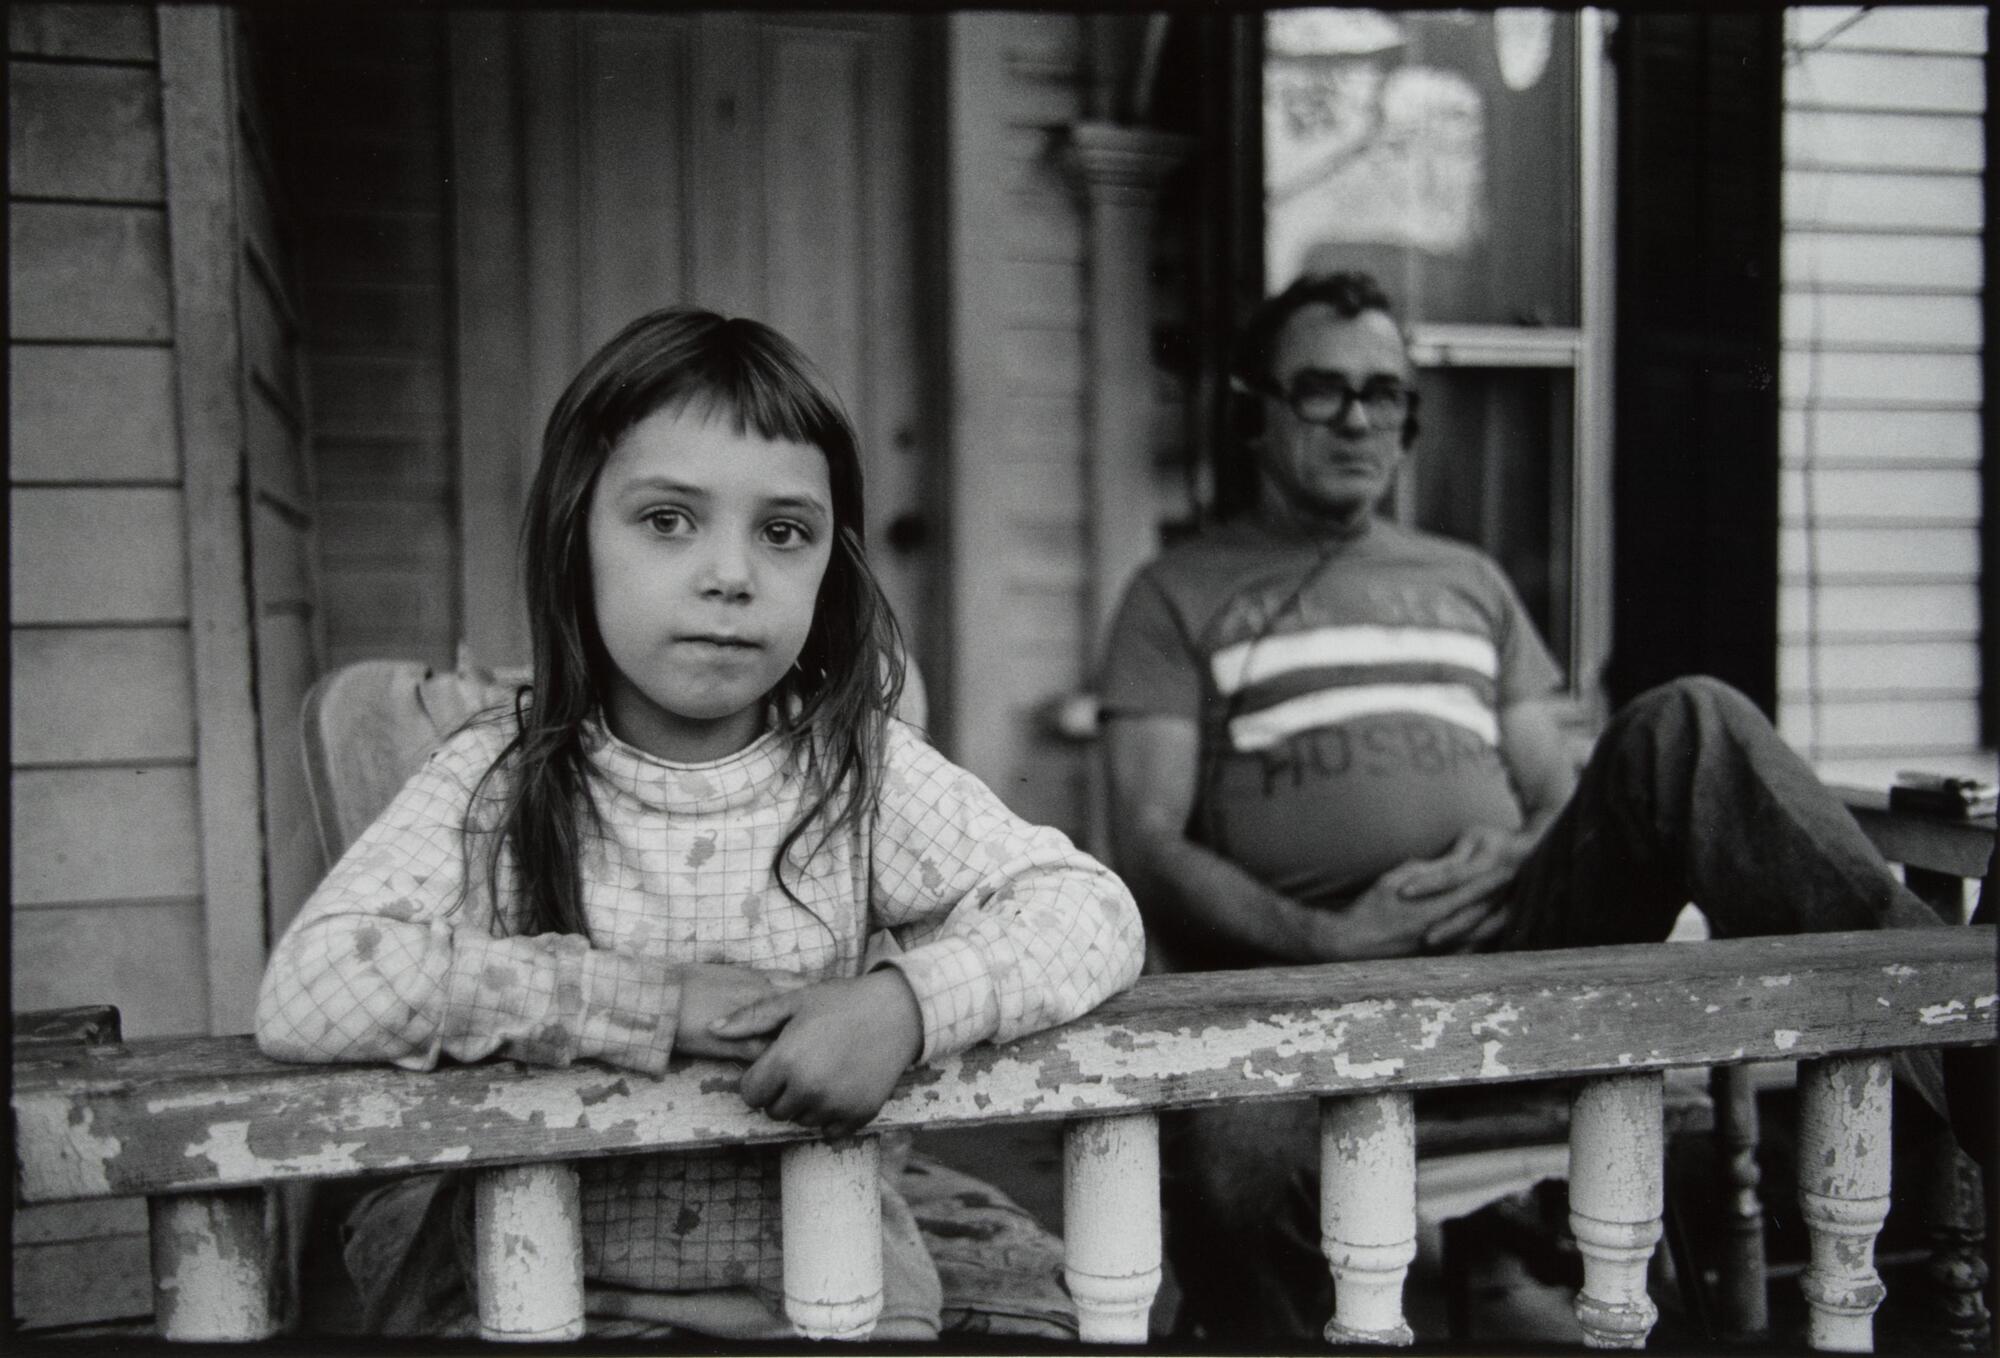 A girl and an older man in glasses sitting on a front porch.